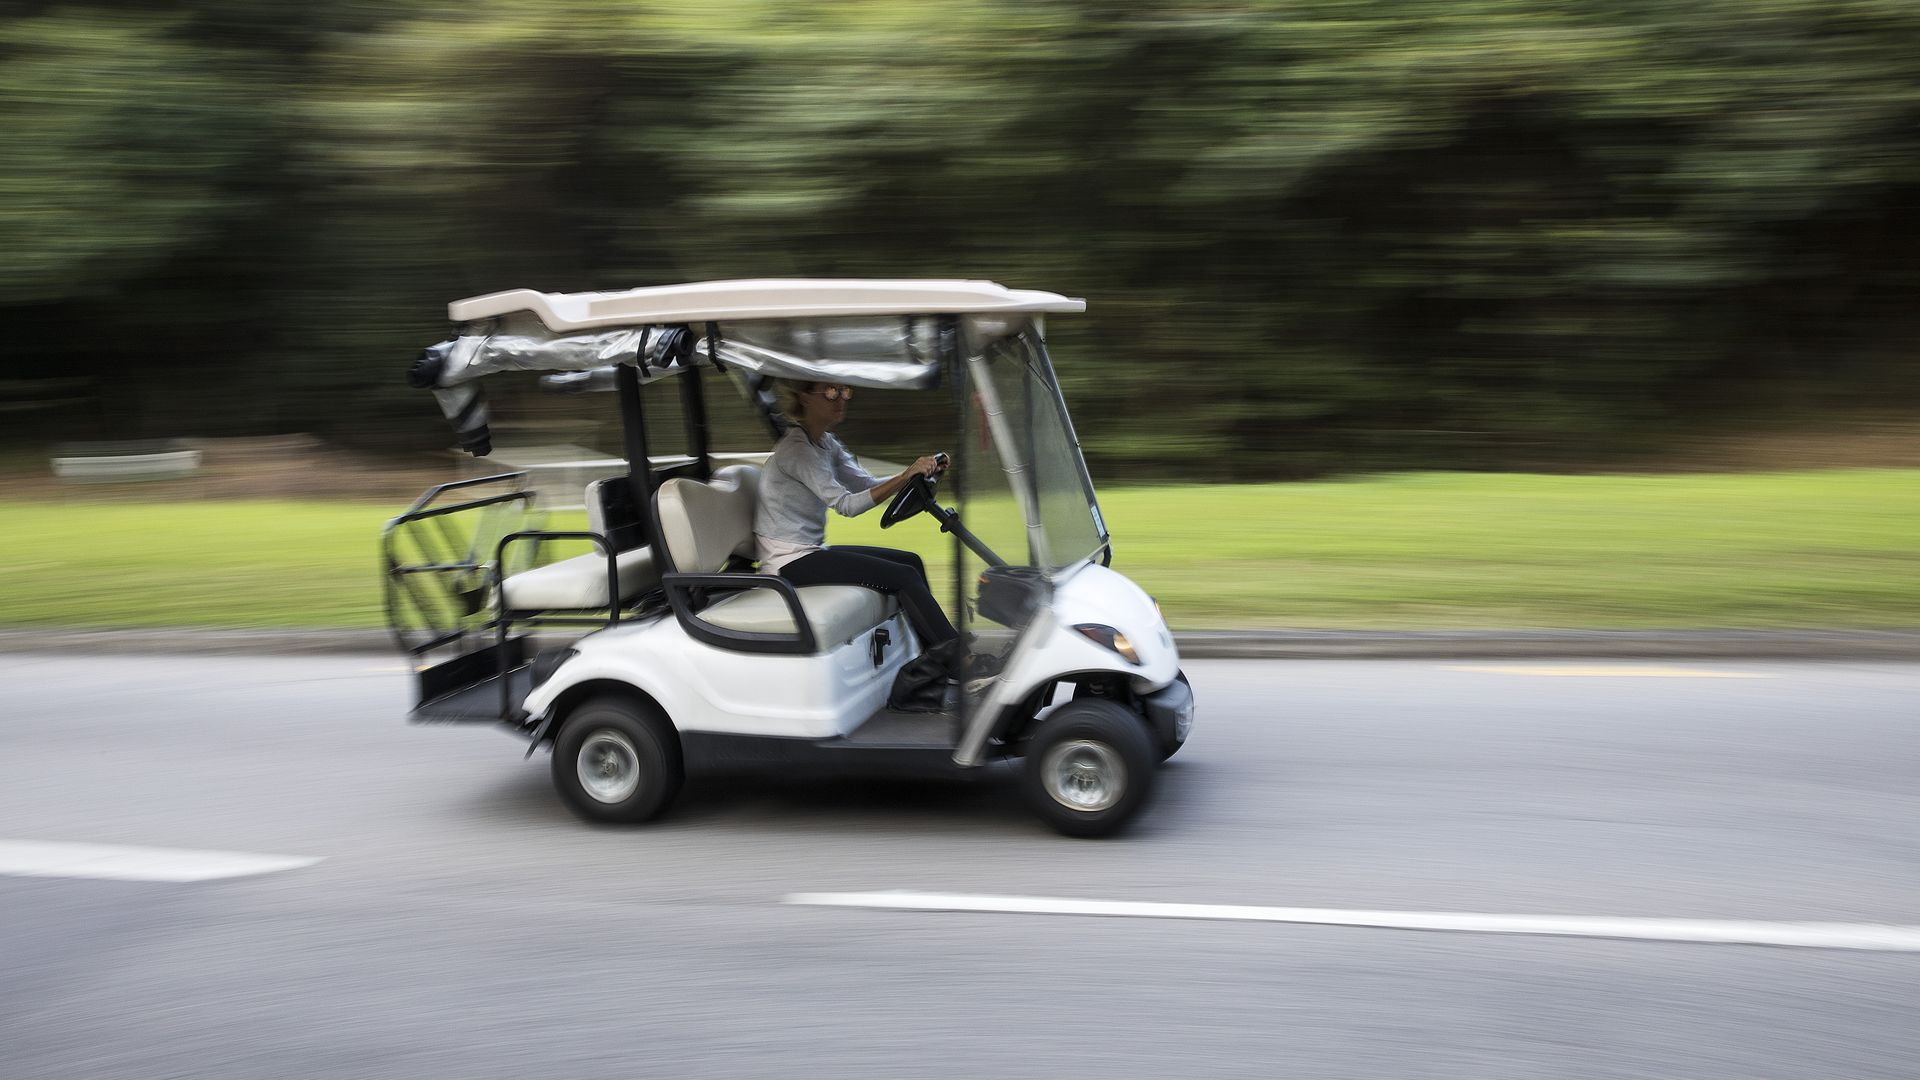 A golf cart travels along a road in Discovery Bay, a residential project developed by Hong Kong Resort Co., on Lantau Island in Hong Kong, China, on Tuesday, March 27, 2018